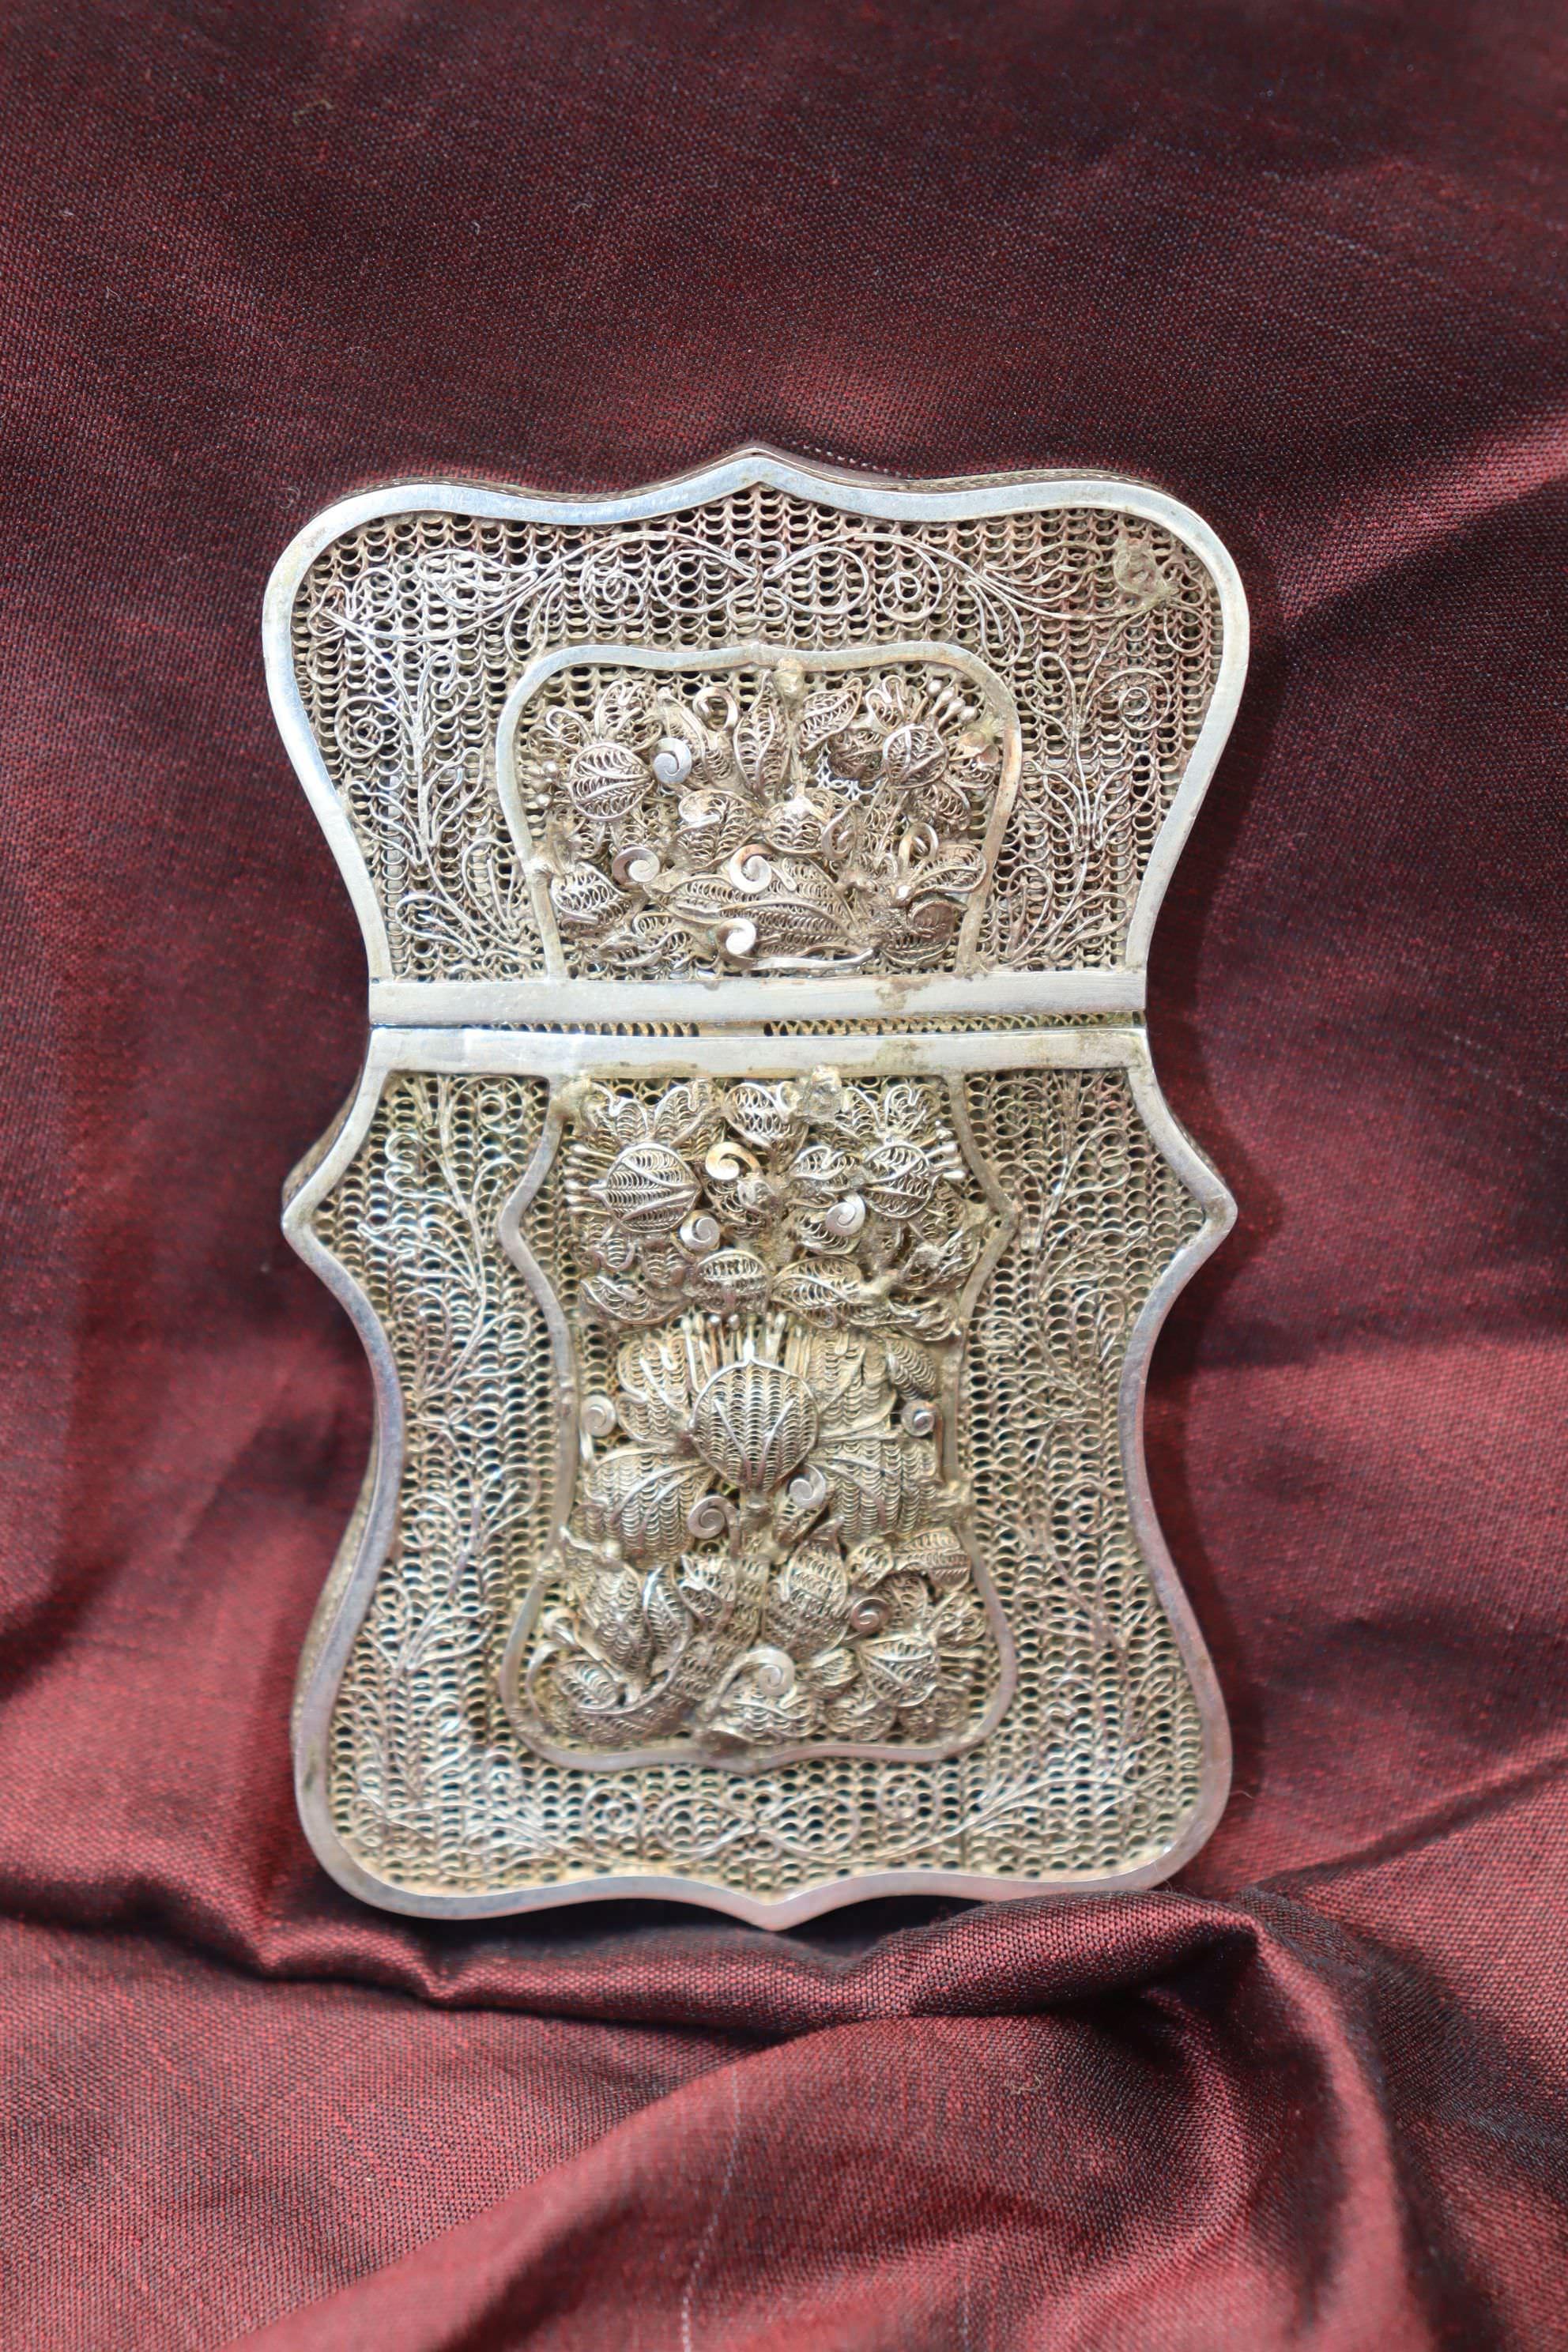 This Chinese filigree silver gilt card case with a lift off lid measures 88 mm (3.5 inches) in height, 56 mm (2.25 inches) in width and has a thickess of 16 mm (5/8ths of an inch). The central cartouches on either side feature intricate raised